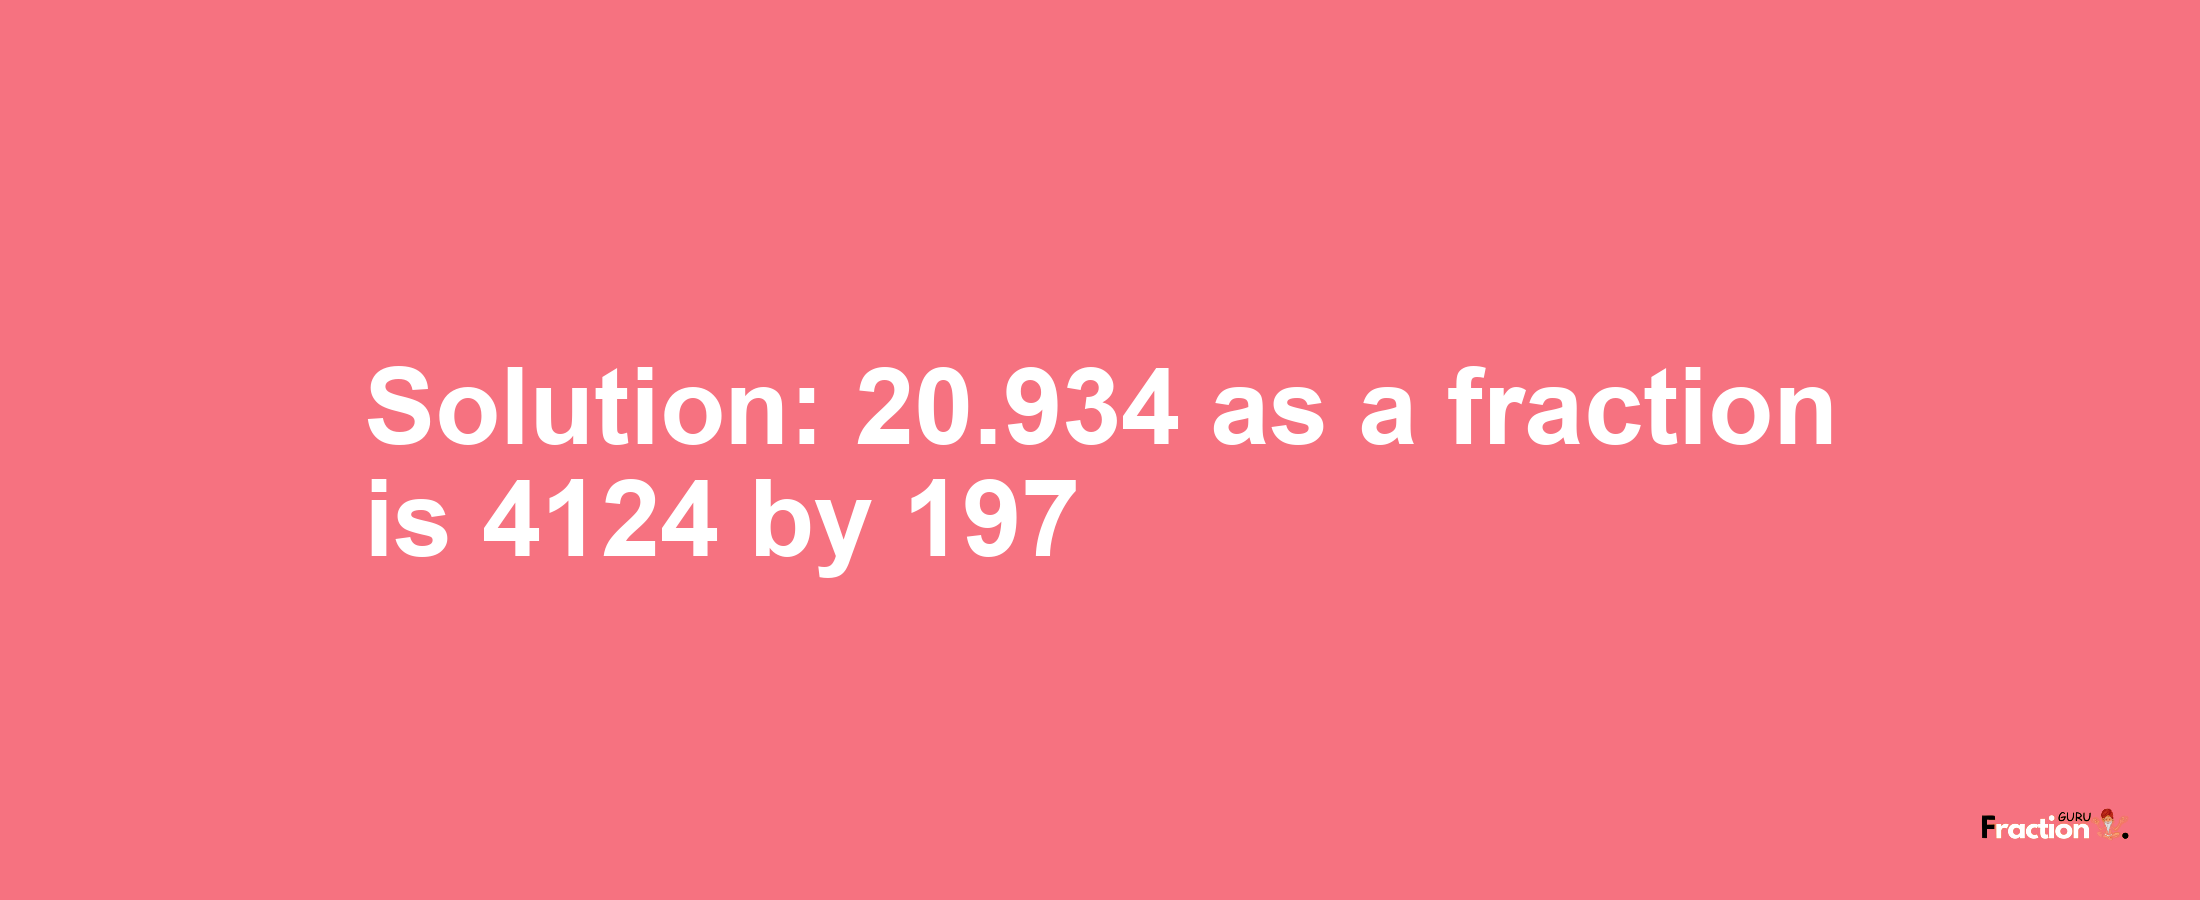 Solution:20.934 as a fraction is 4124/197